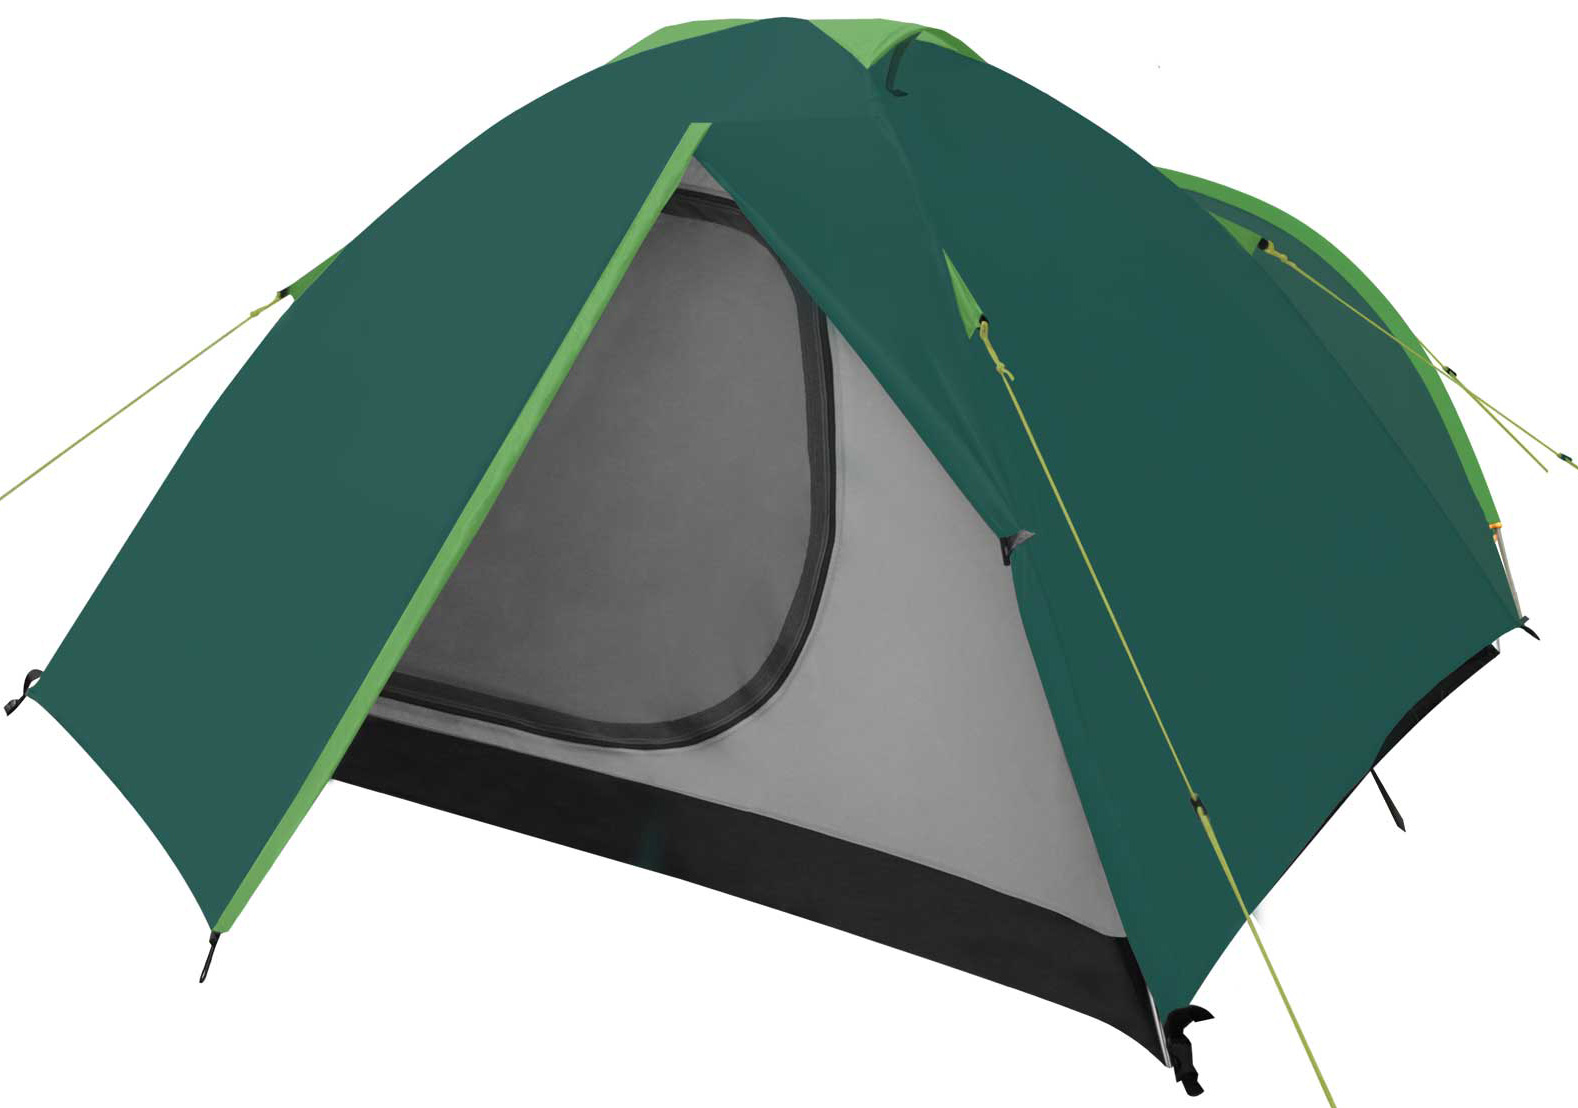 BRYCE 3 - Camping tent